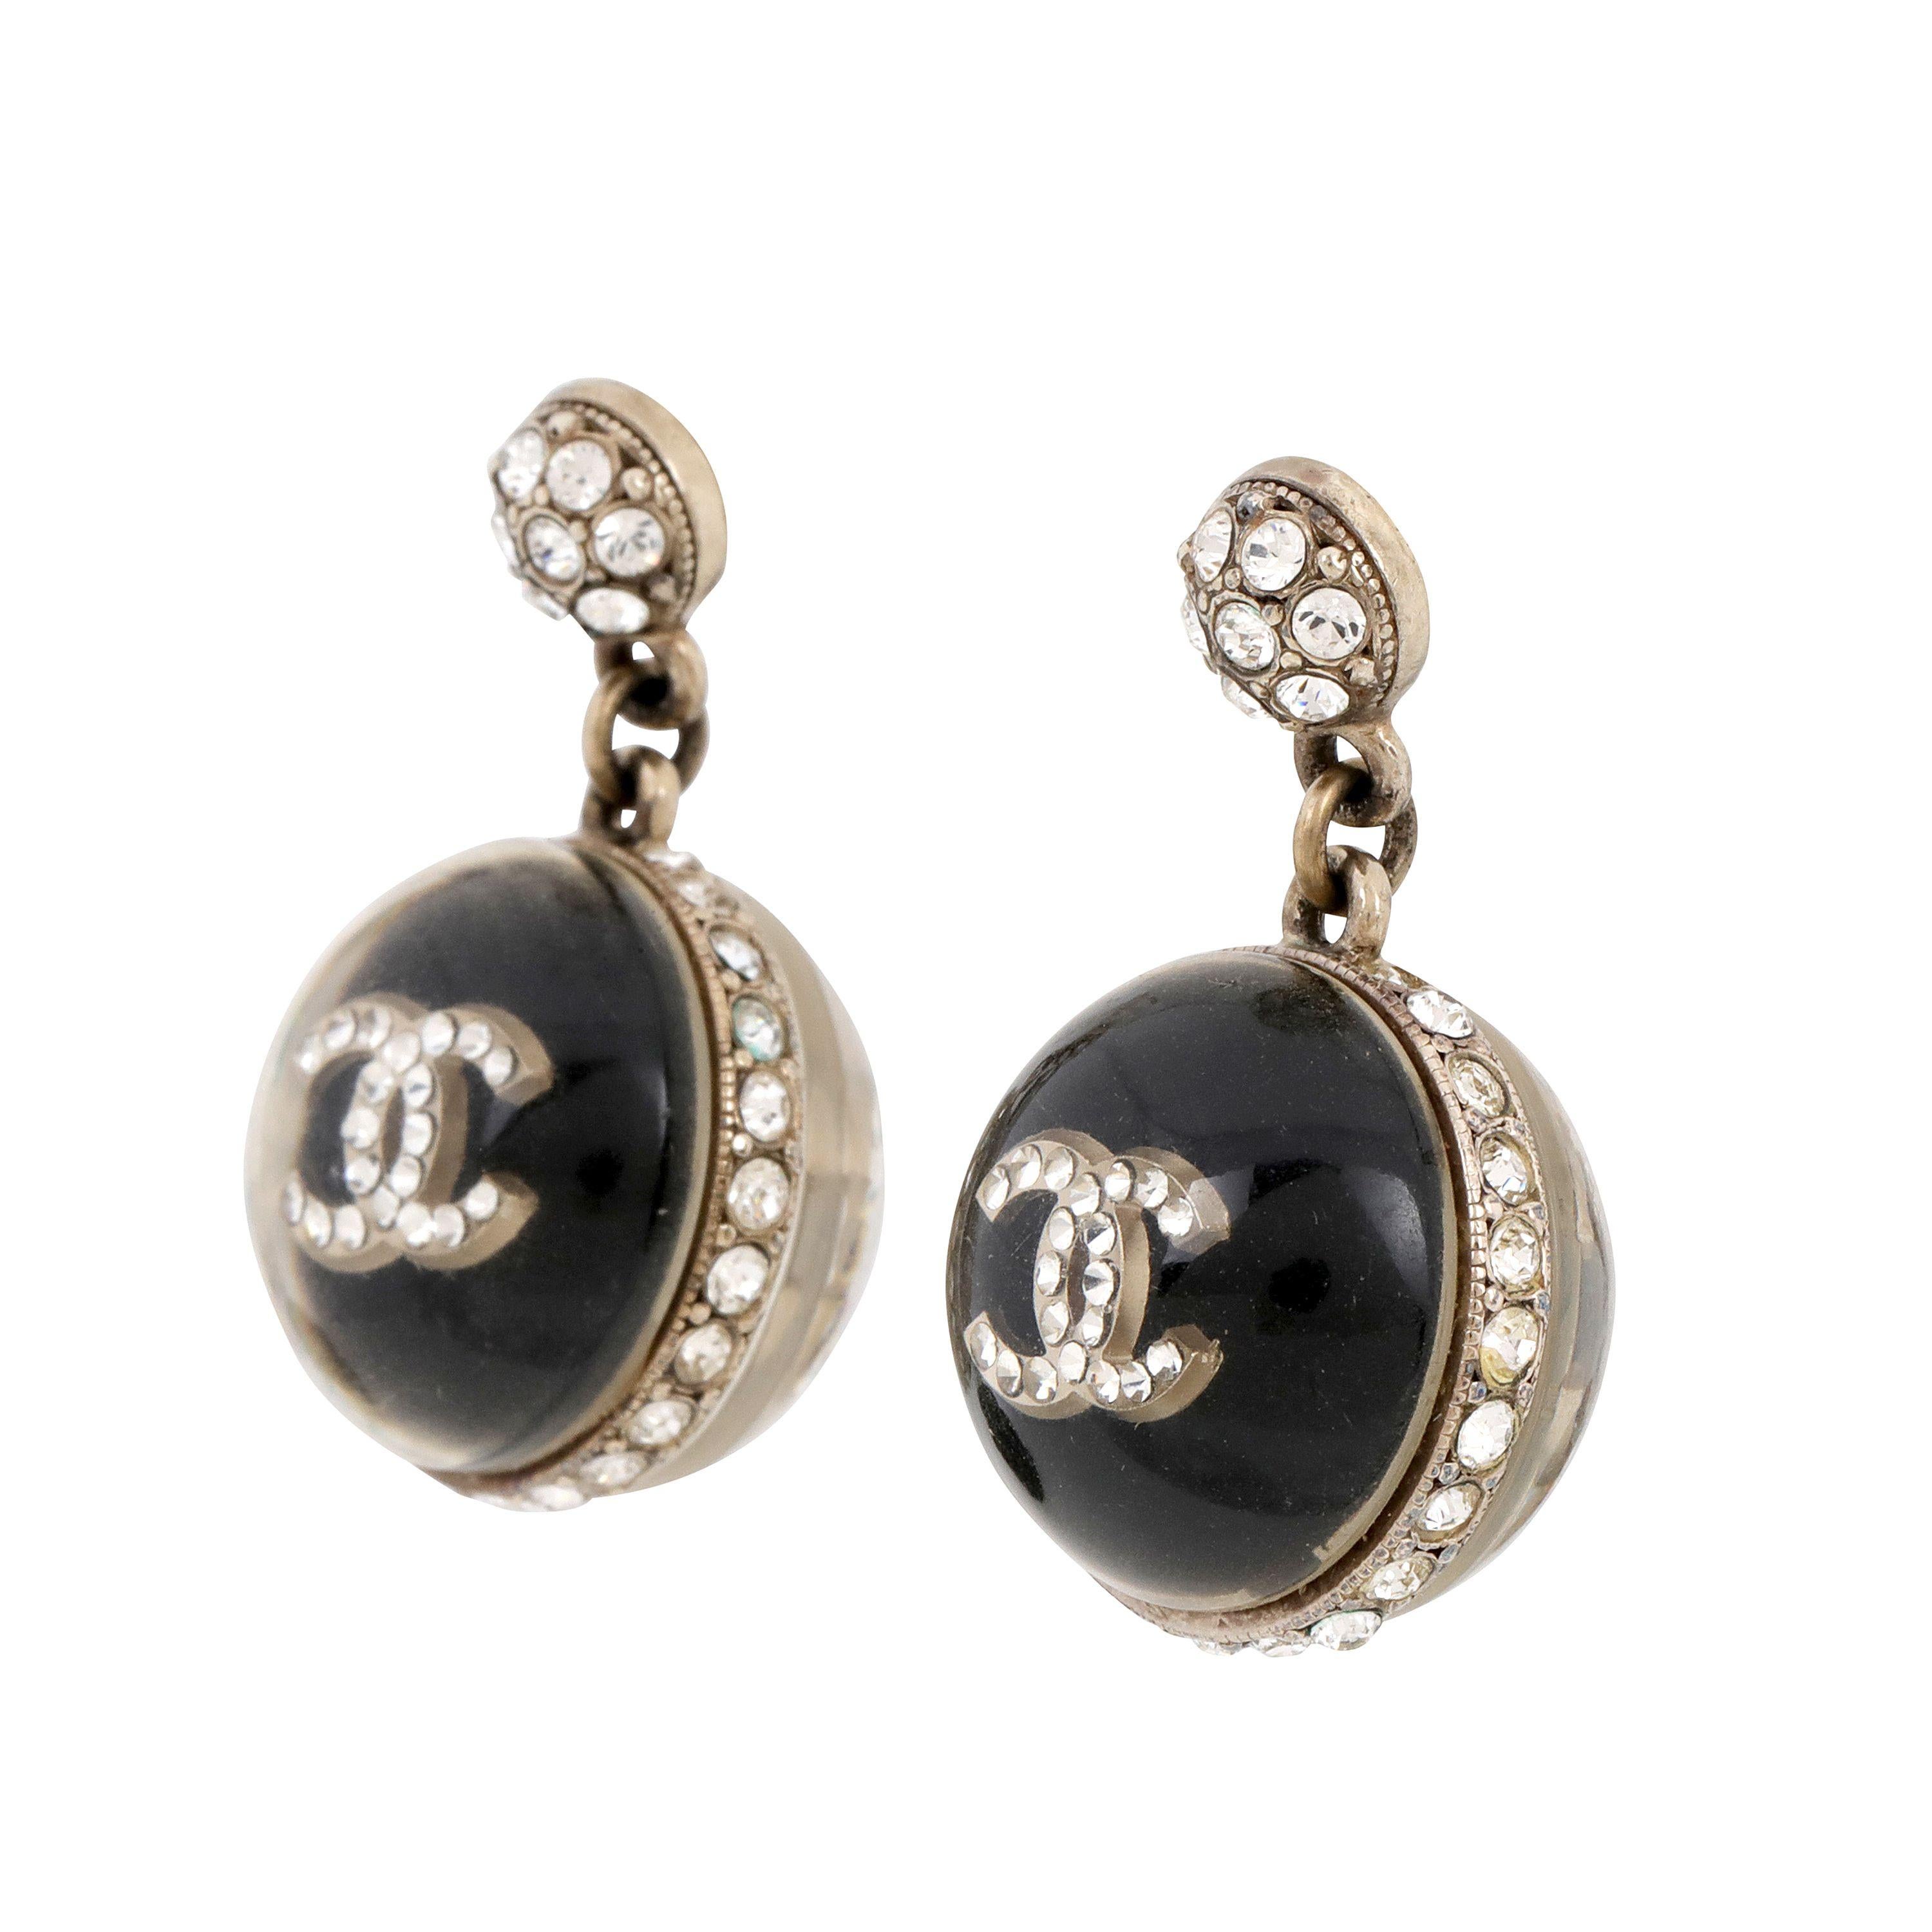 These authentic. Chanel Black and Lucite CC Dangle Earrings are in excellent vintage condition.  Pouch or box included. 

PBF 14023

